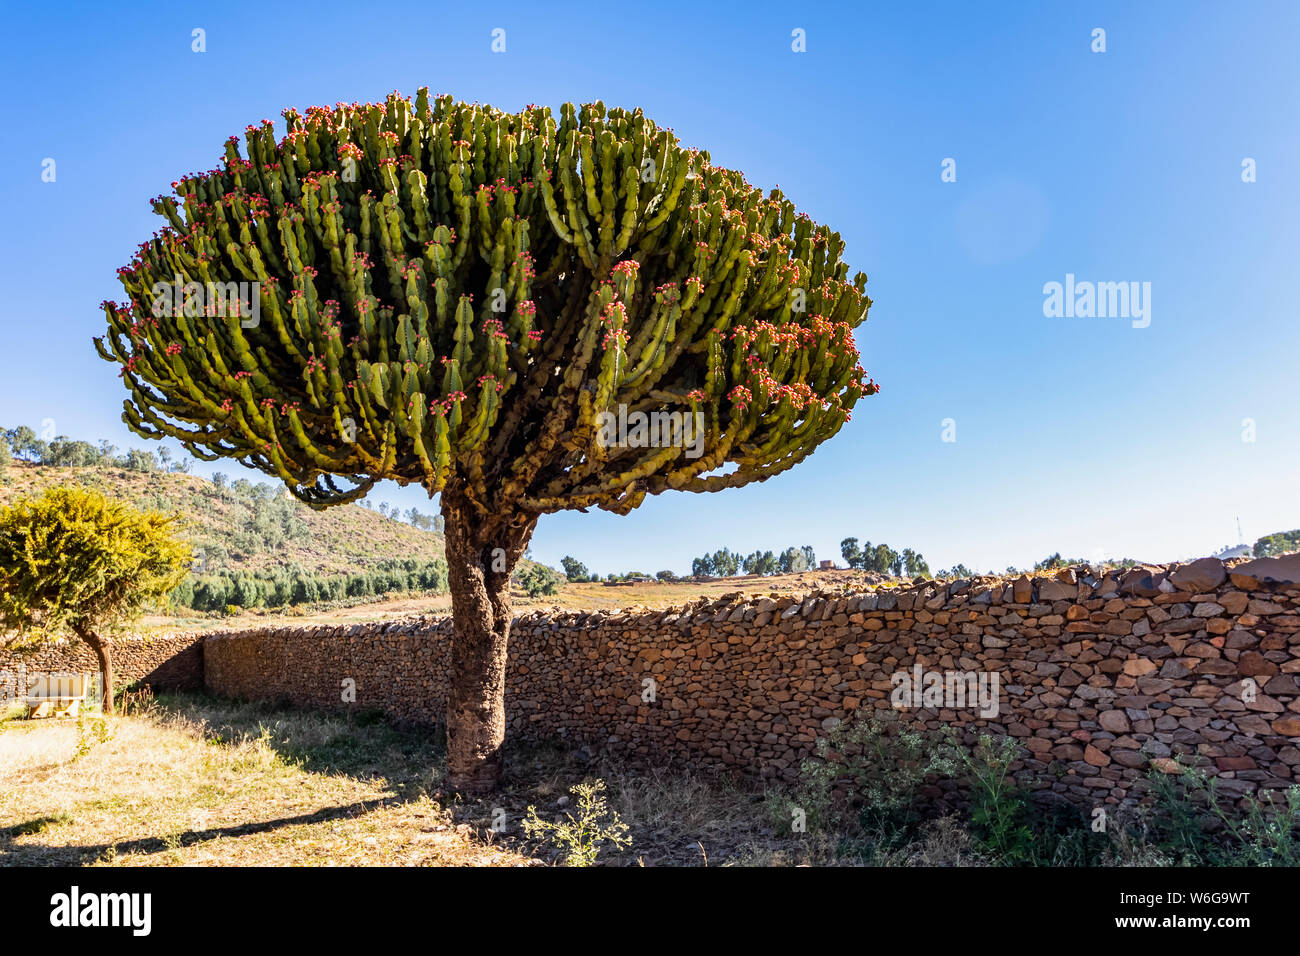 Arborescent cactus by the Dungur Palace, known locally as the Palace of the  Queen of Sheba; Axum, Tigray Region, Ethiopia Stock Photo - Alamy